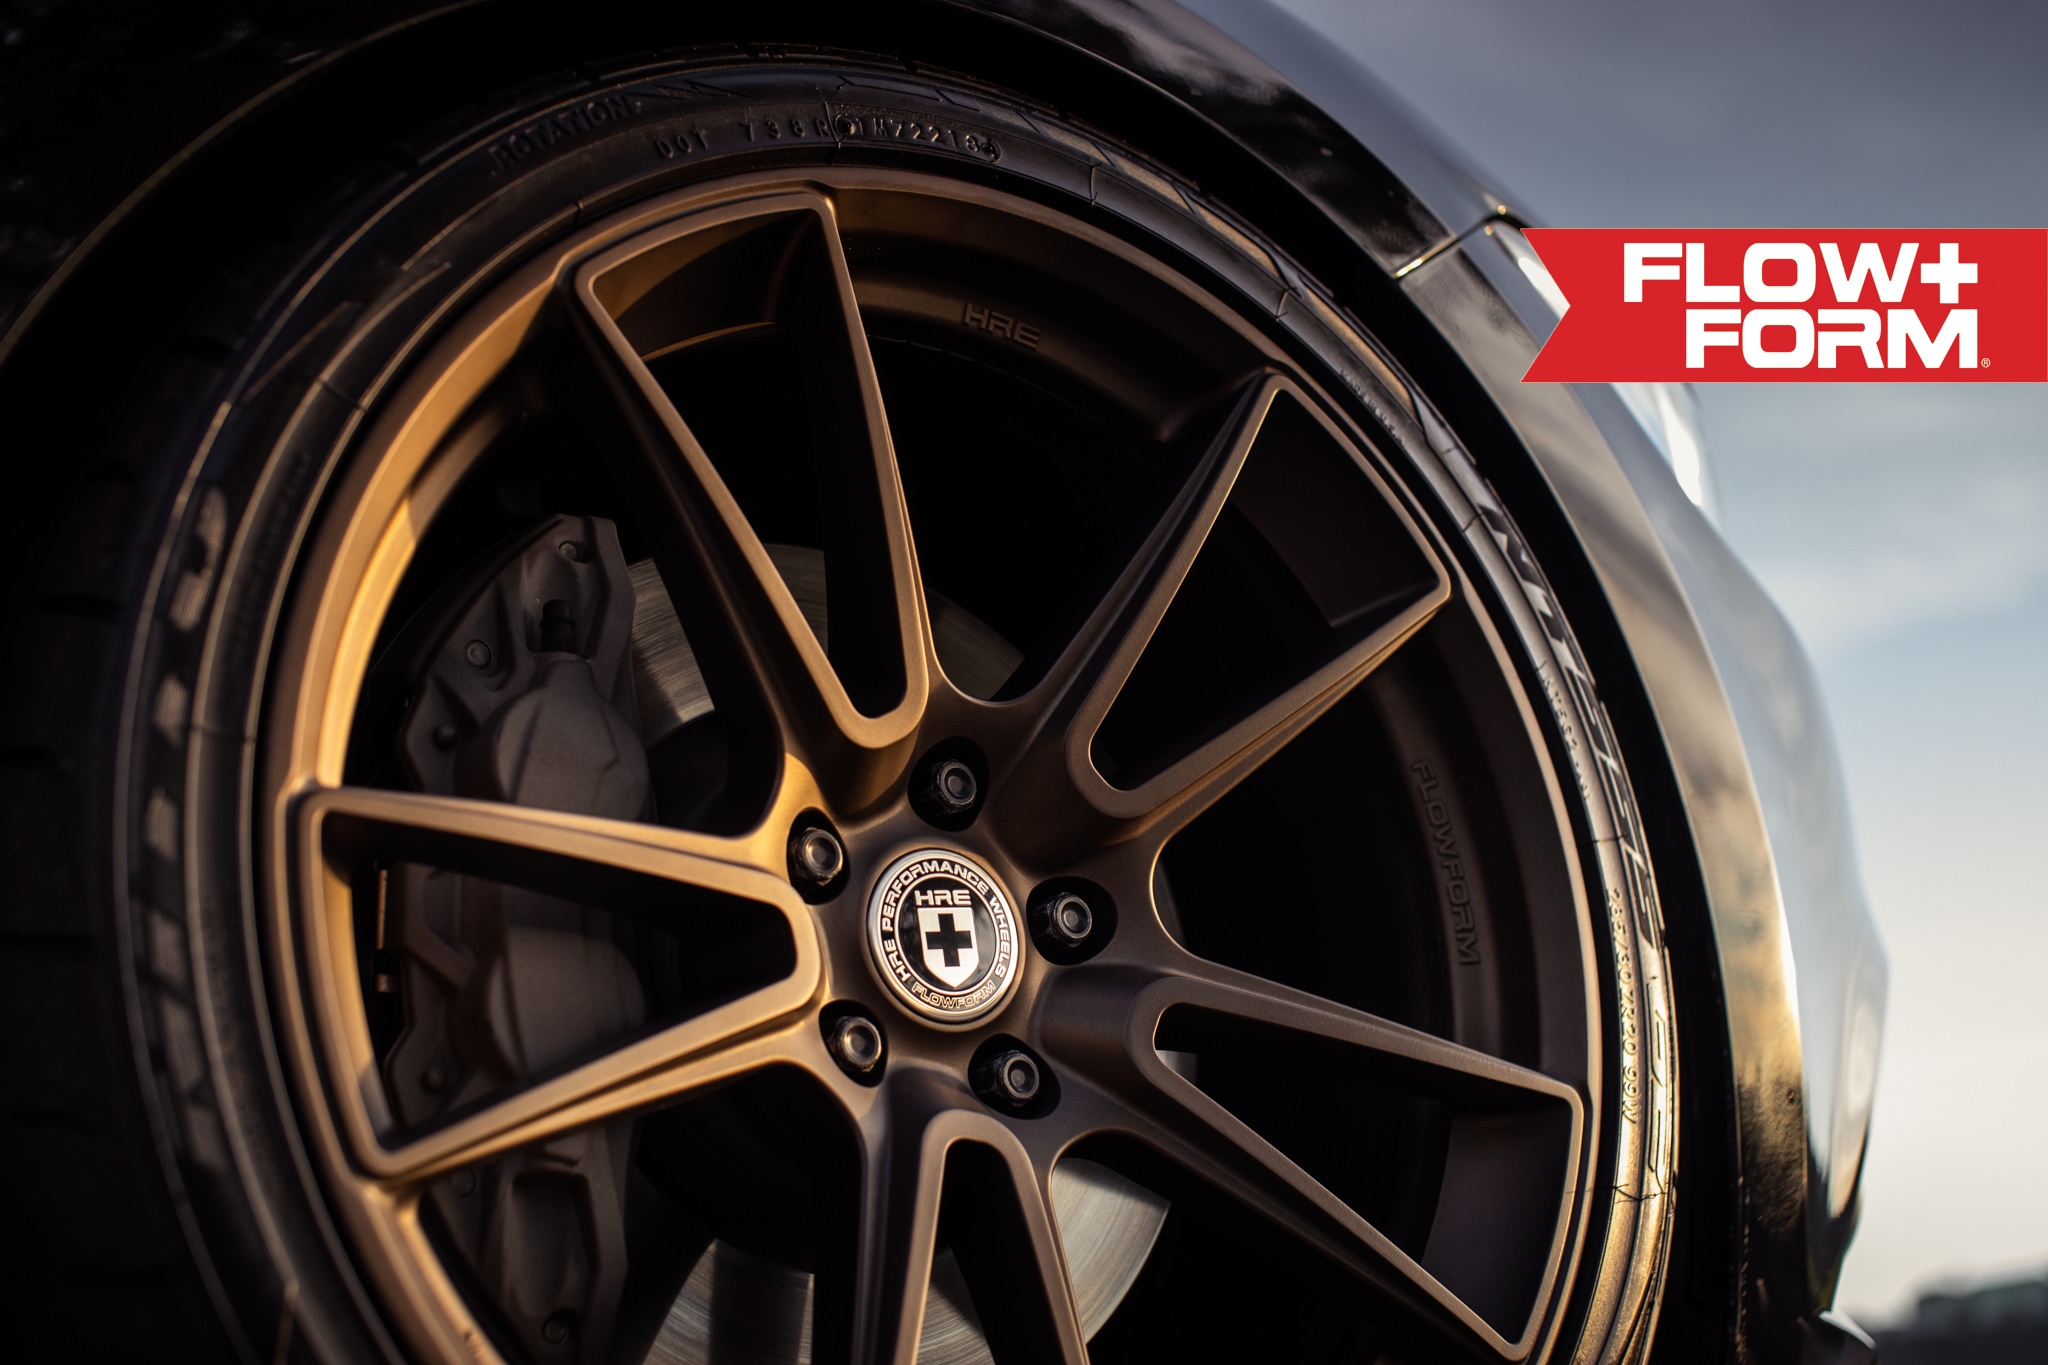 S650 Mustang UP TO $775 OFF on HRE Flow Form Wheels - HRE FF28 FF21 FF11 FF10 FF04 - Vibe Motorsports 7